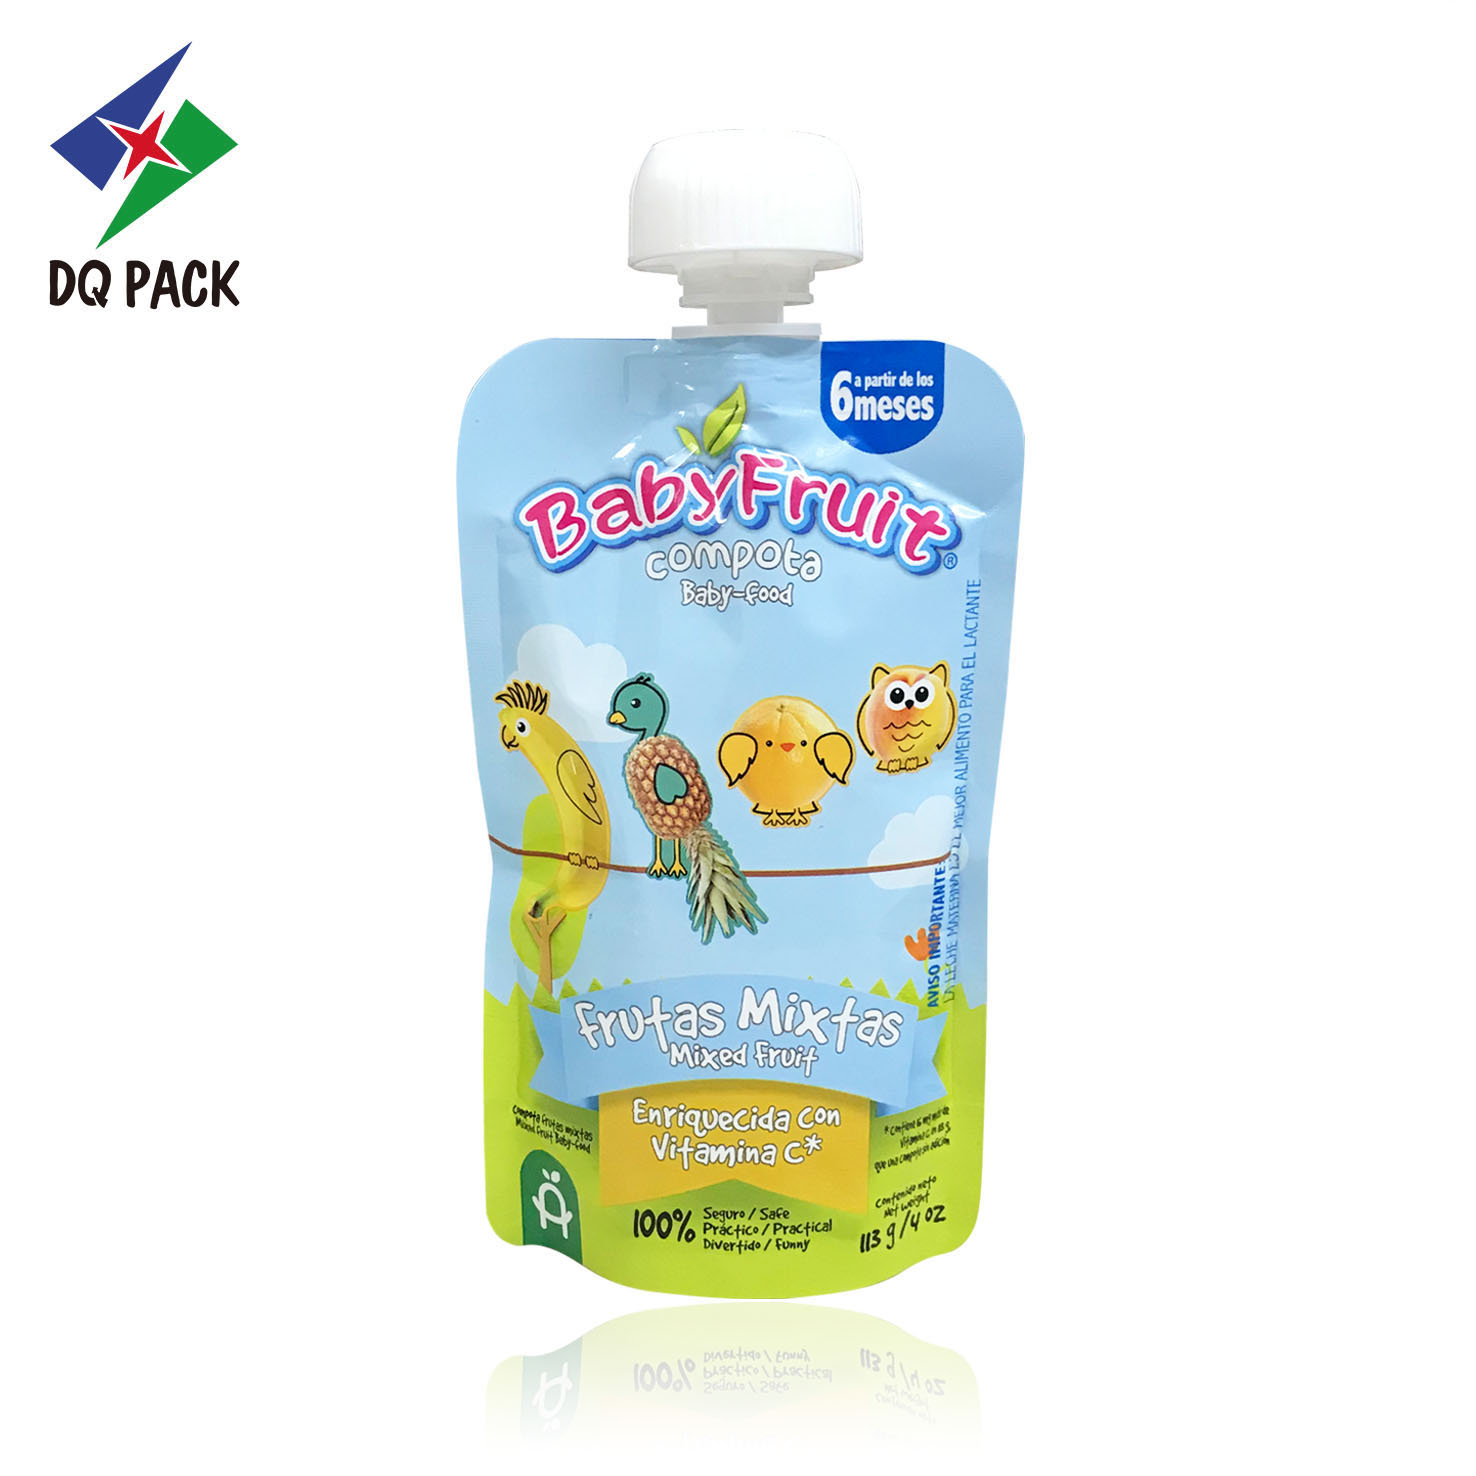 DQ PACK Custom Design 113g Baby Food Retort Bag PET Stand Up Spout Pouch with Mushroom Lid